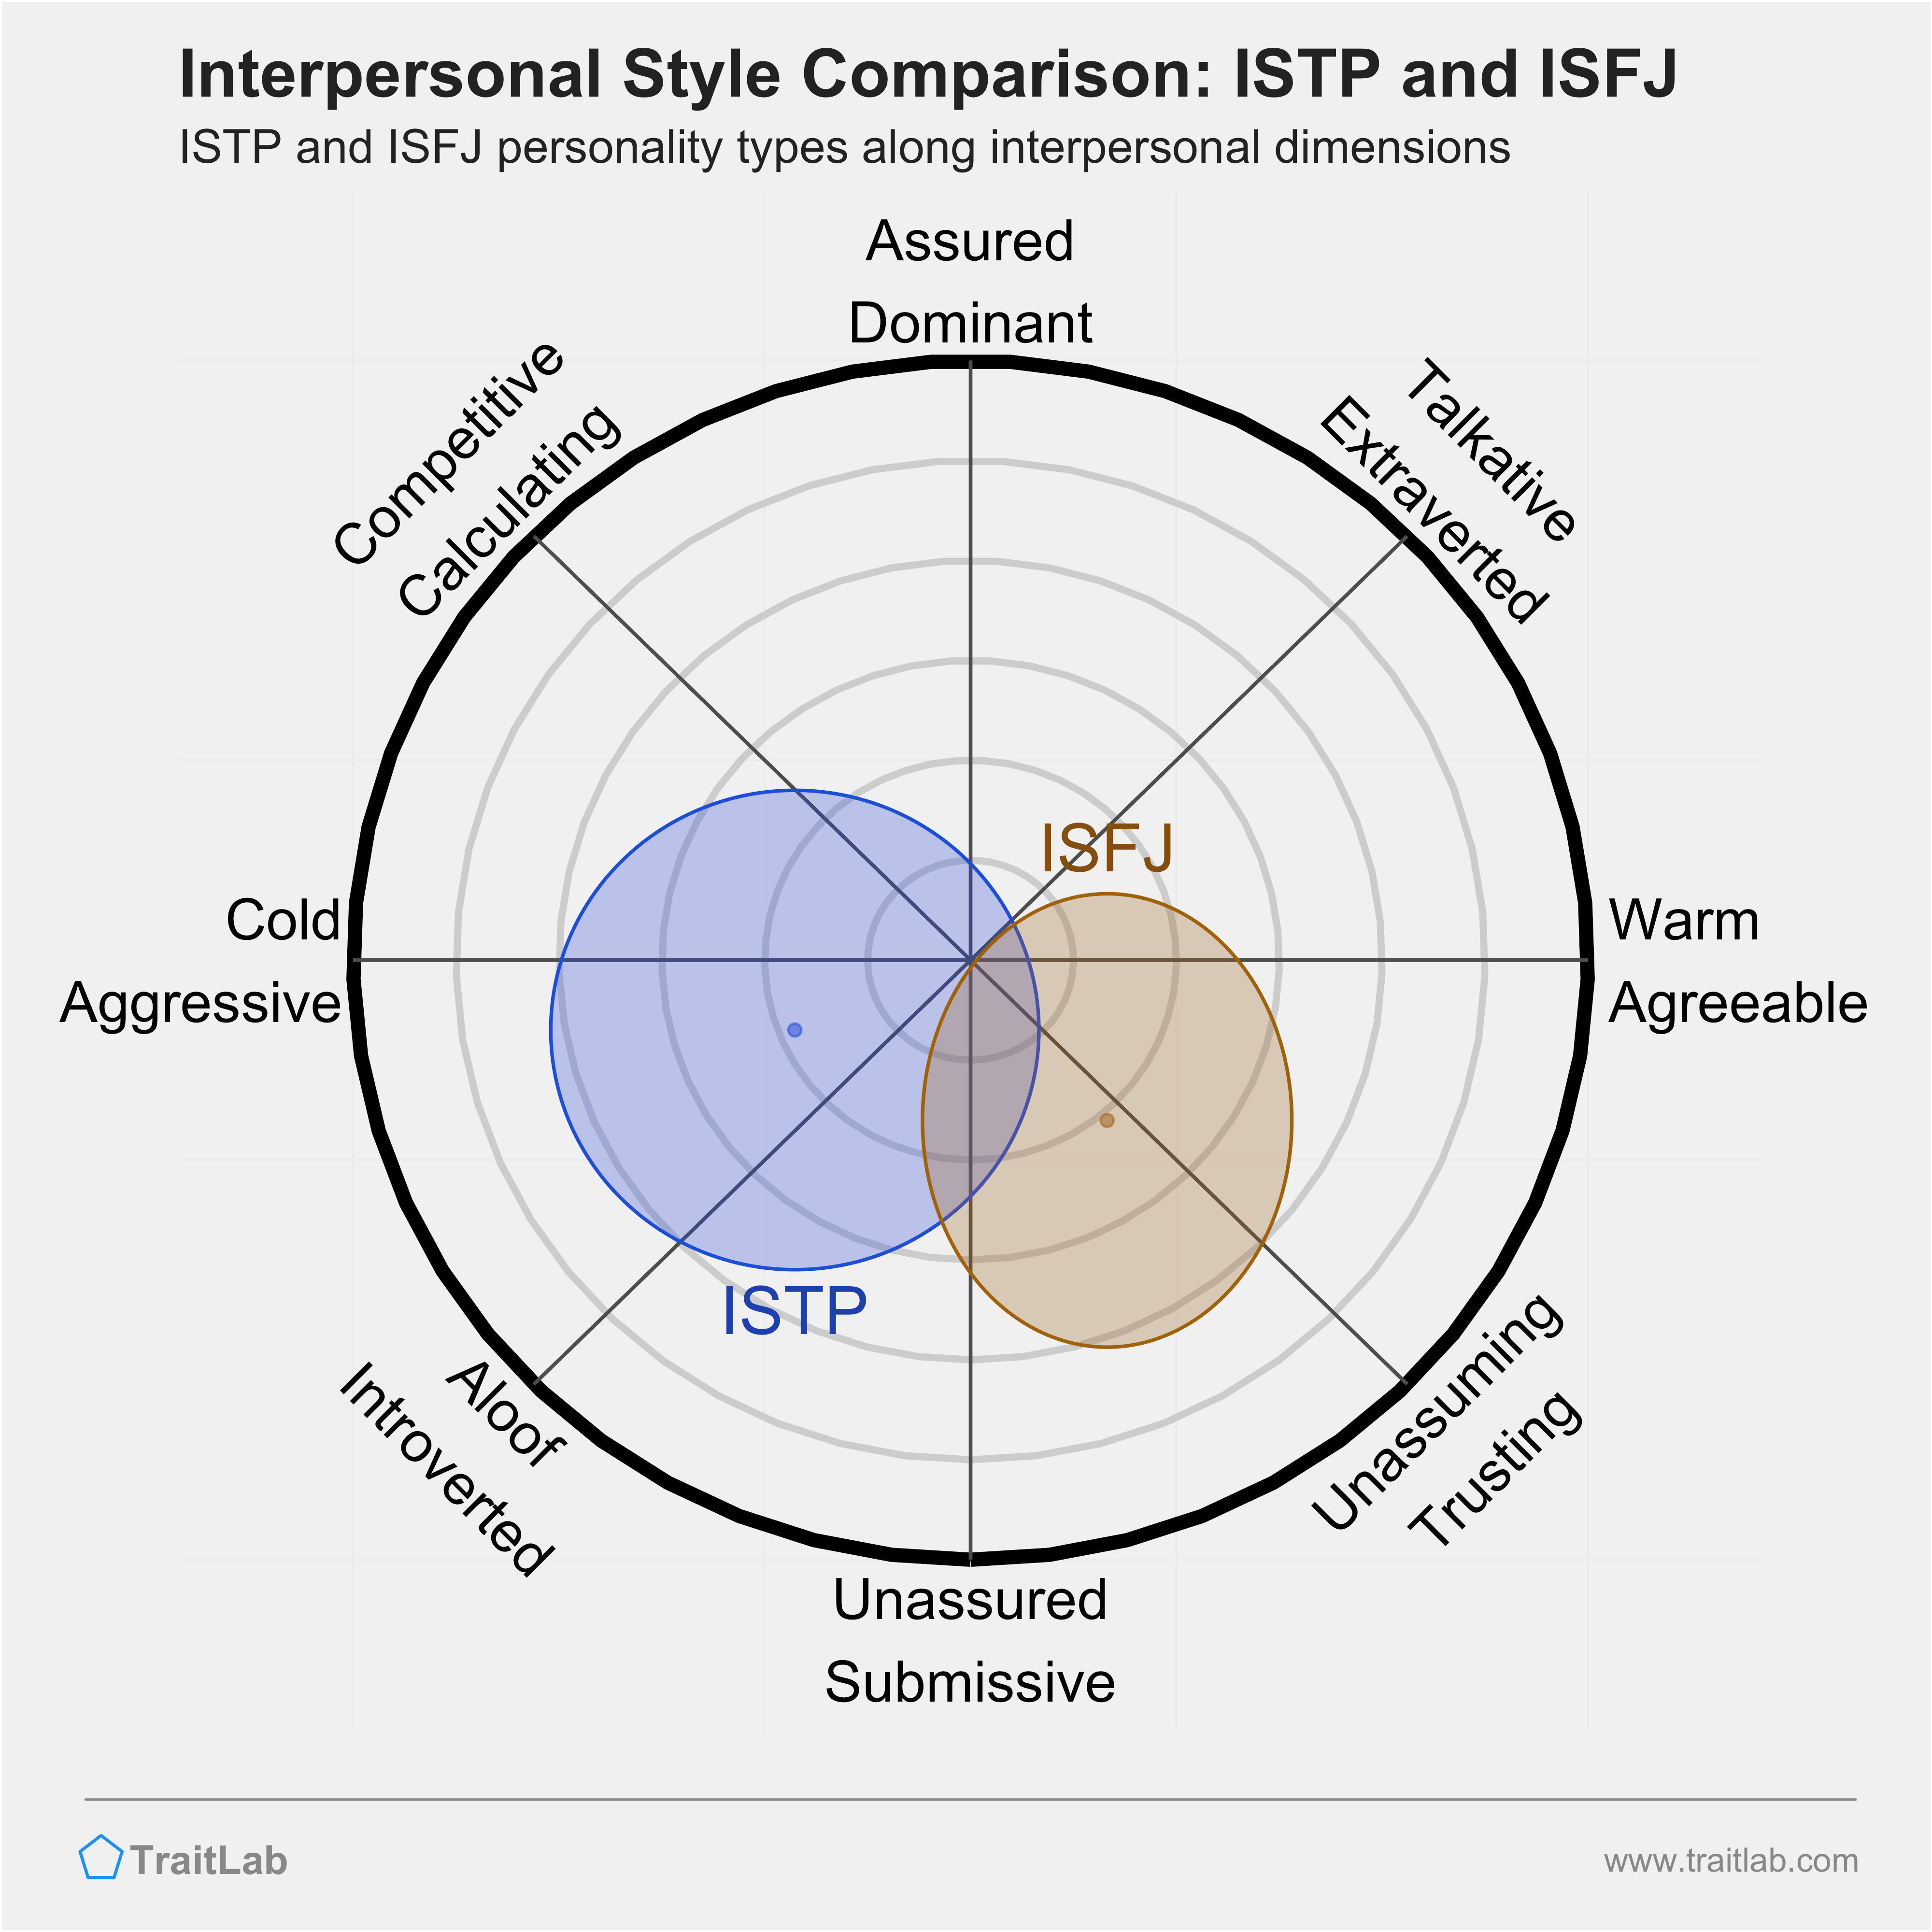 ISTP and ISFJ comparison across interpersonal dimensions